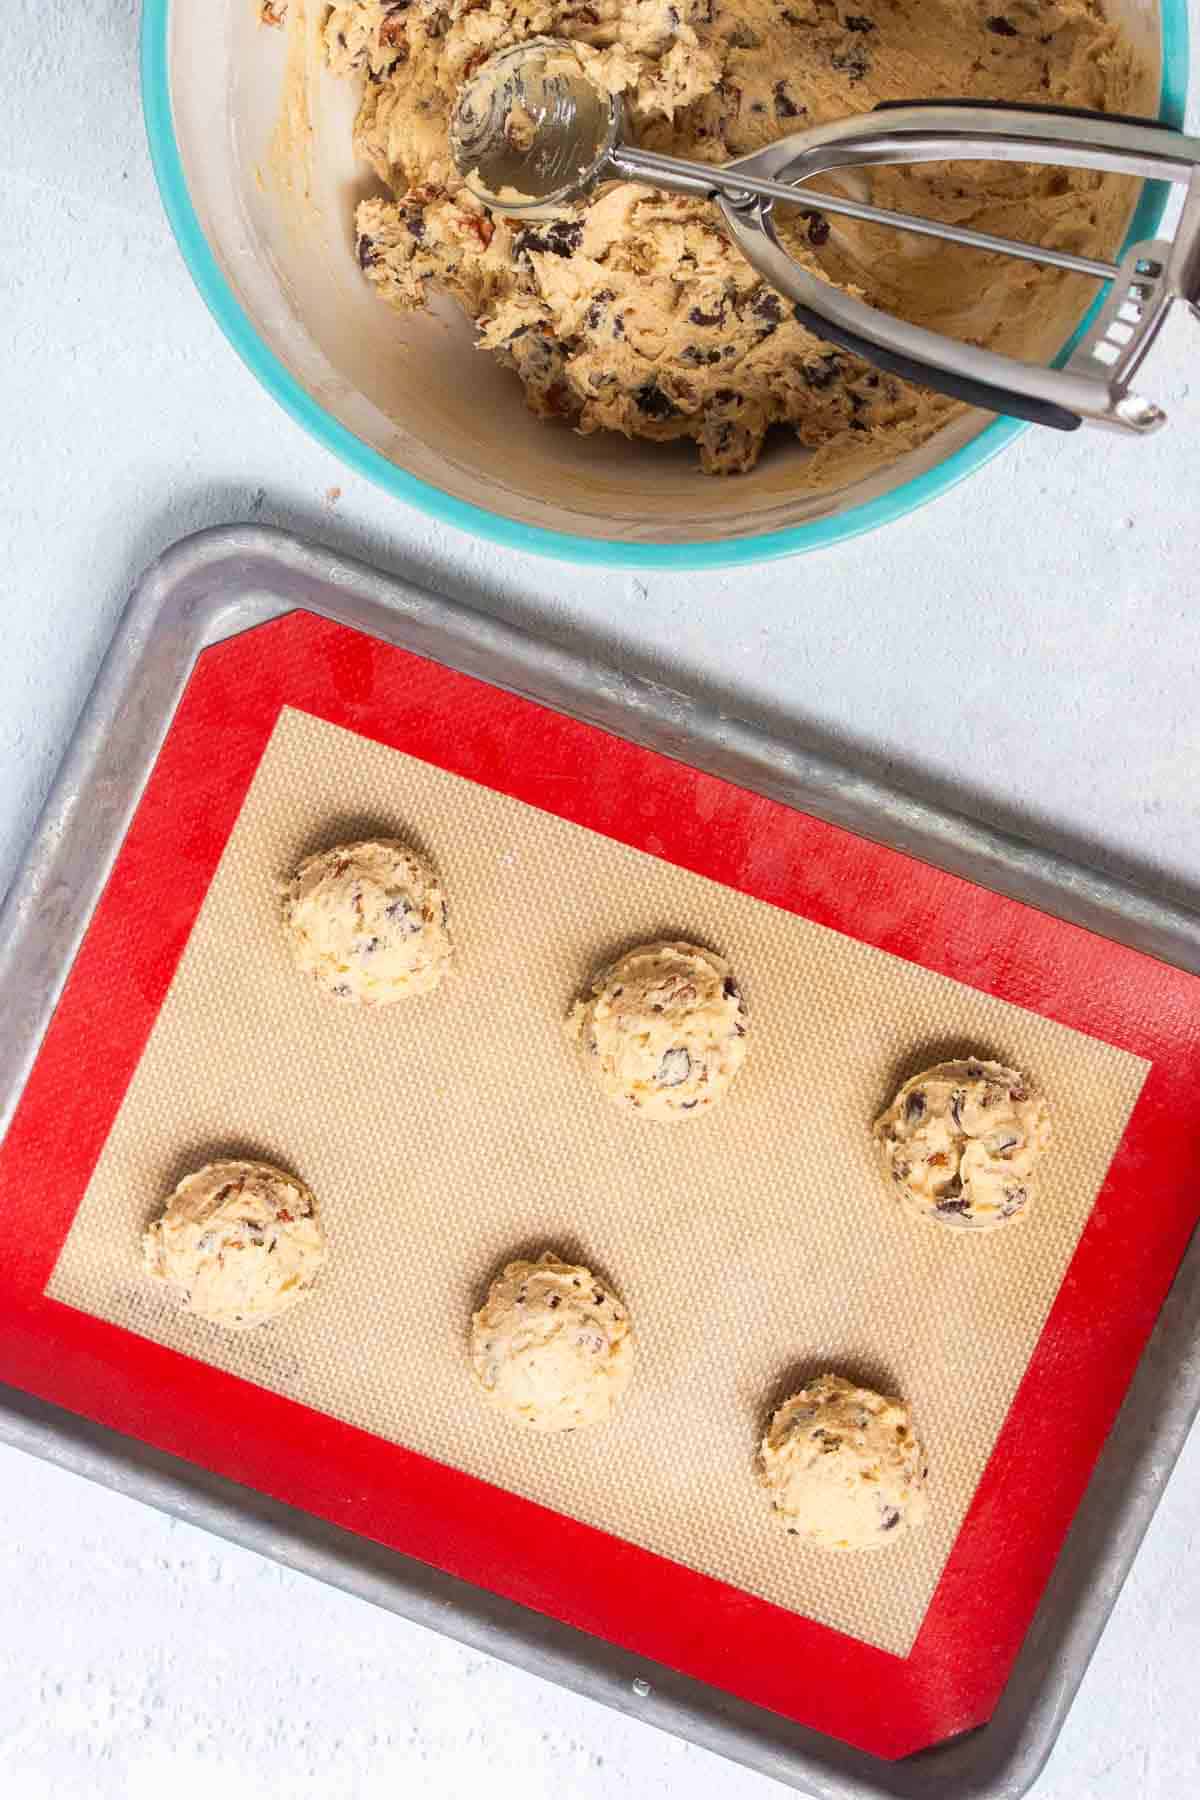 The chocolate chip pecan cookie dough is scooped onto a lined baking sheet into uniform balls that are evenly spaced apart